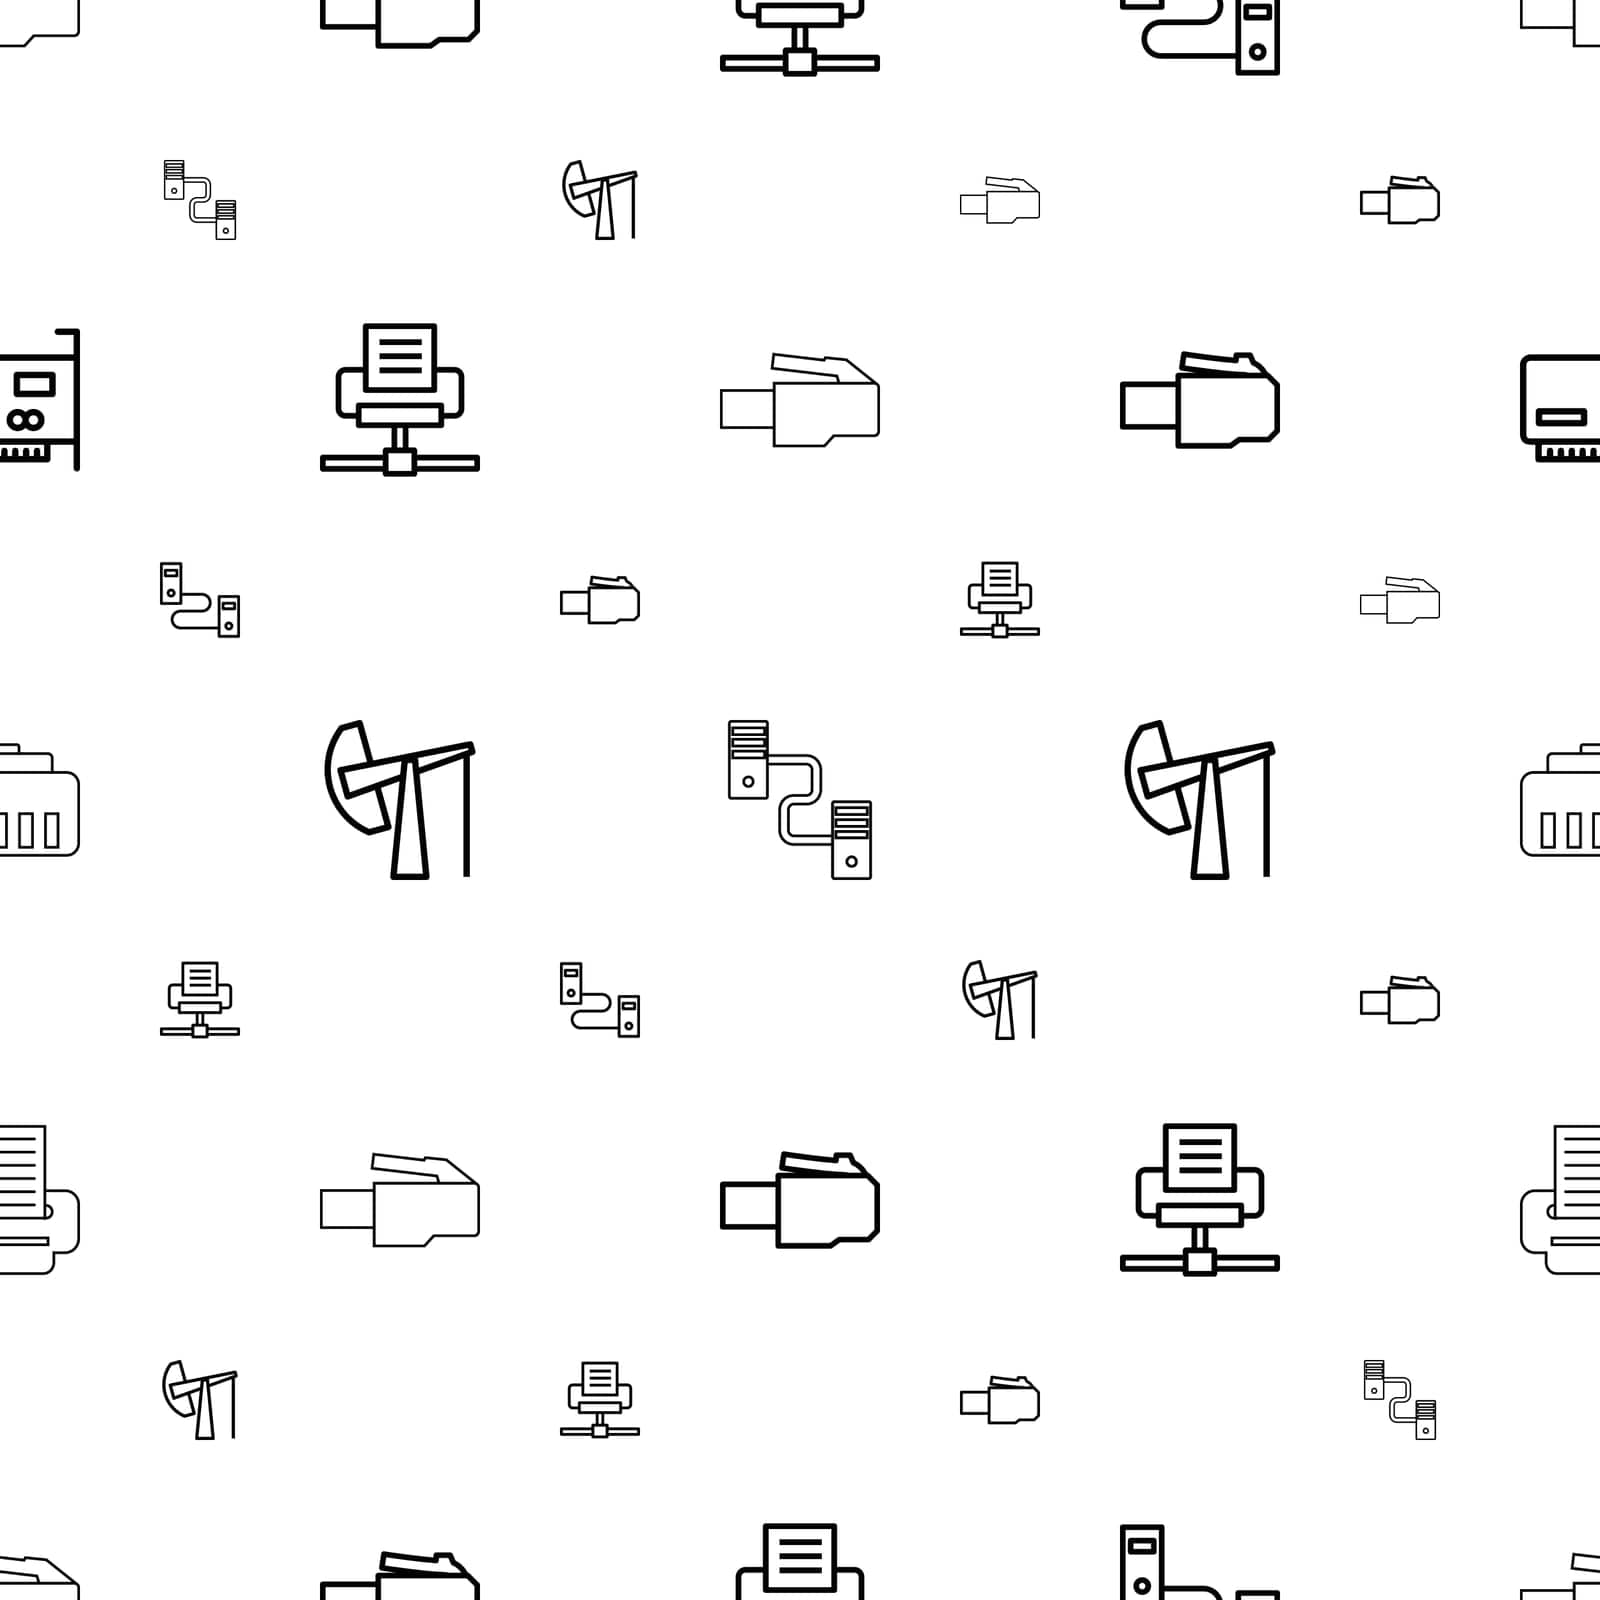 symbol,oilfield,data,usb,line,fuel,pattern,icon,sign,isolated,industry,platform,network,rig,computer,oil,white,design,connection,vector,power,cable,universal,connect,adapter,black,mobile,jack,cord,wire,charger,connector,derrick,phone,port,background,plug,internet